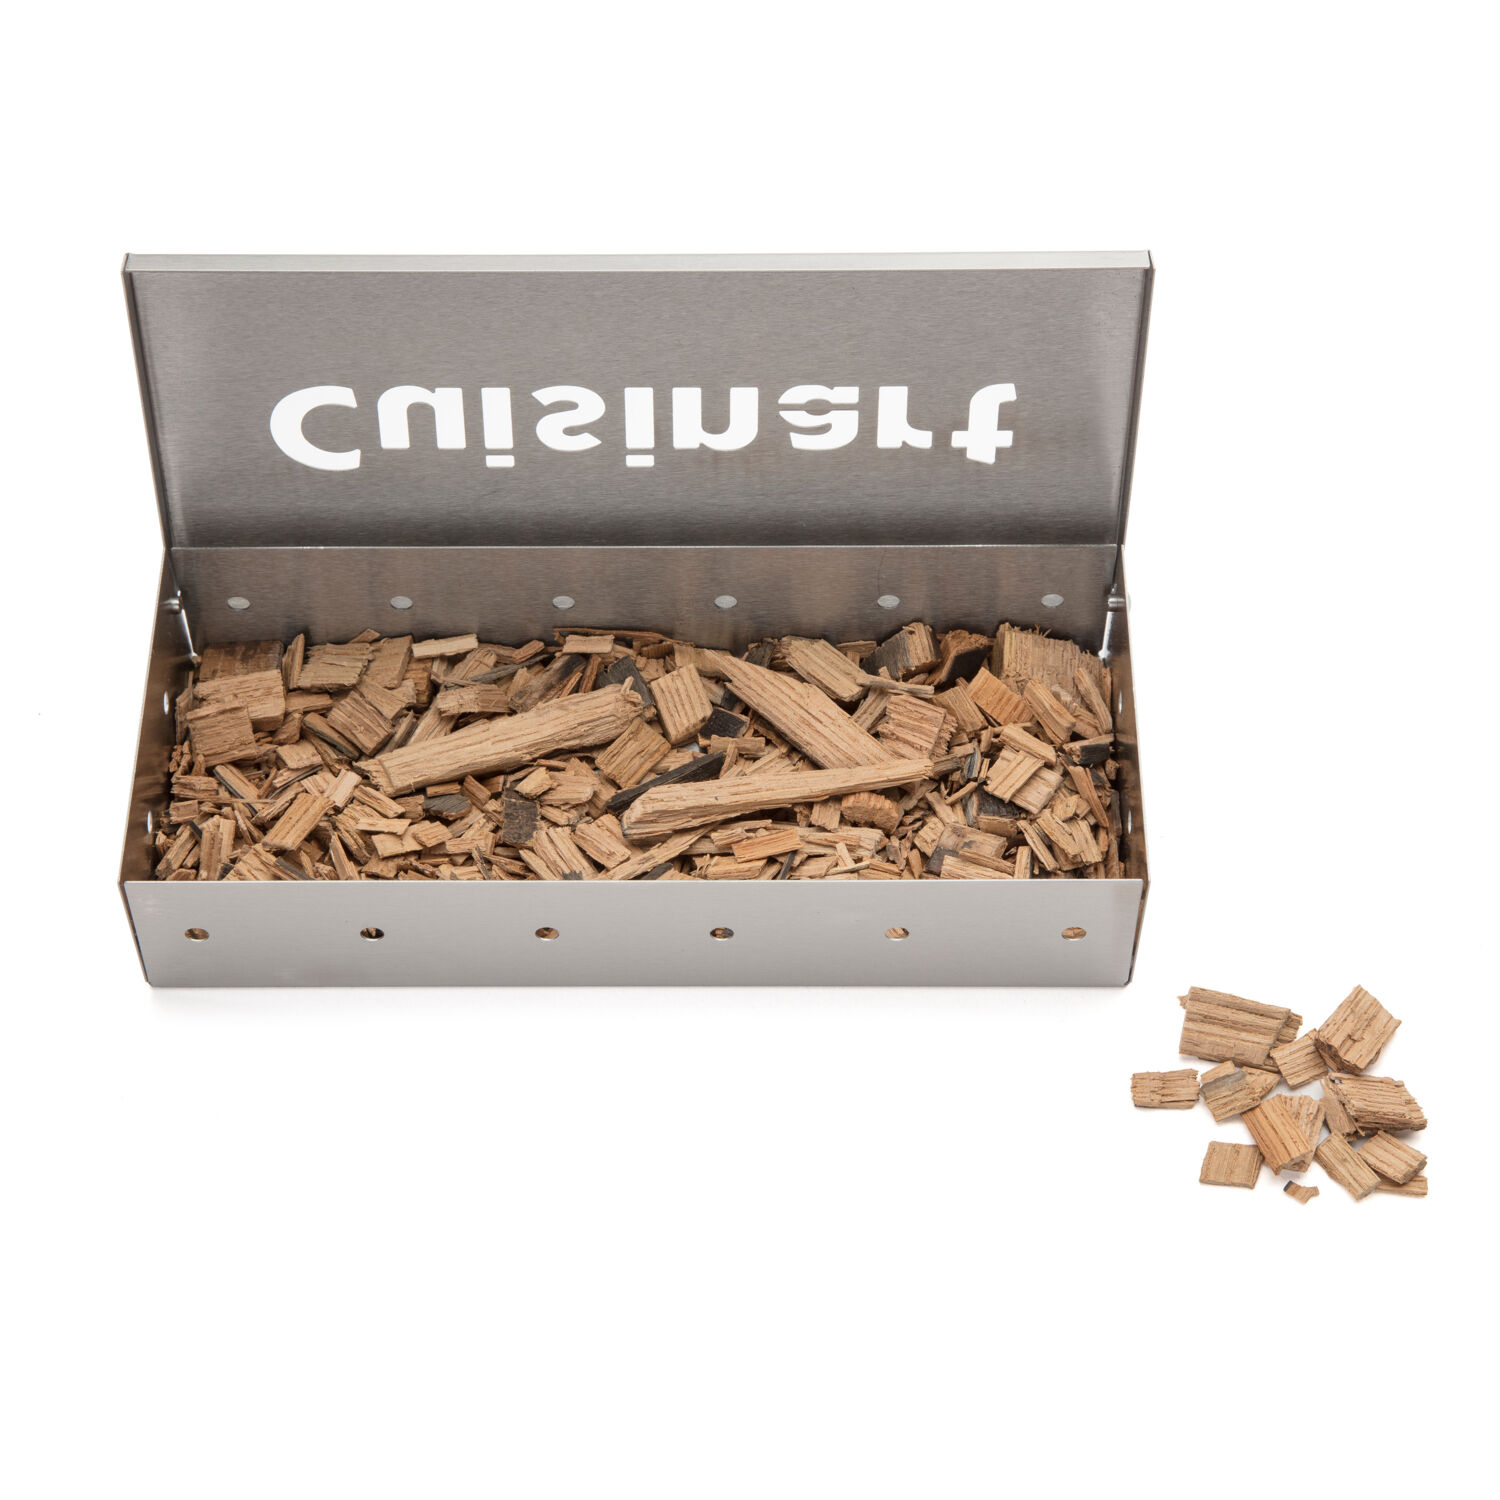 Cuisinart Wood Chip Smoker Box in Stainless Steel - image 4 of 8